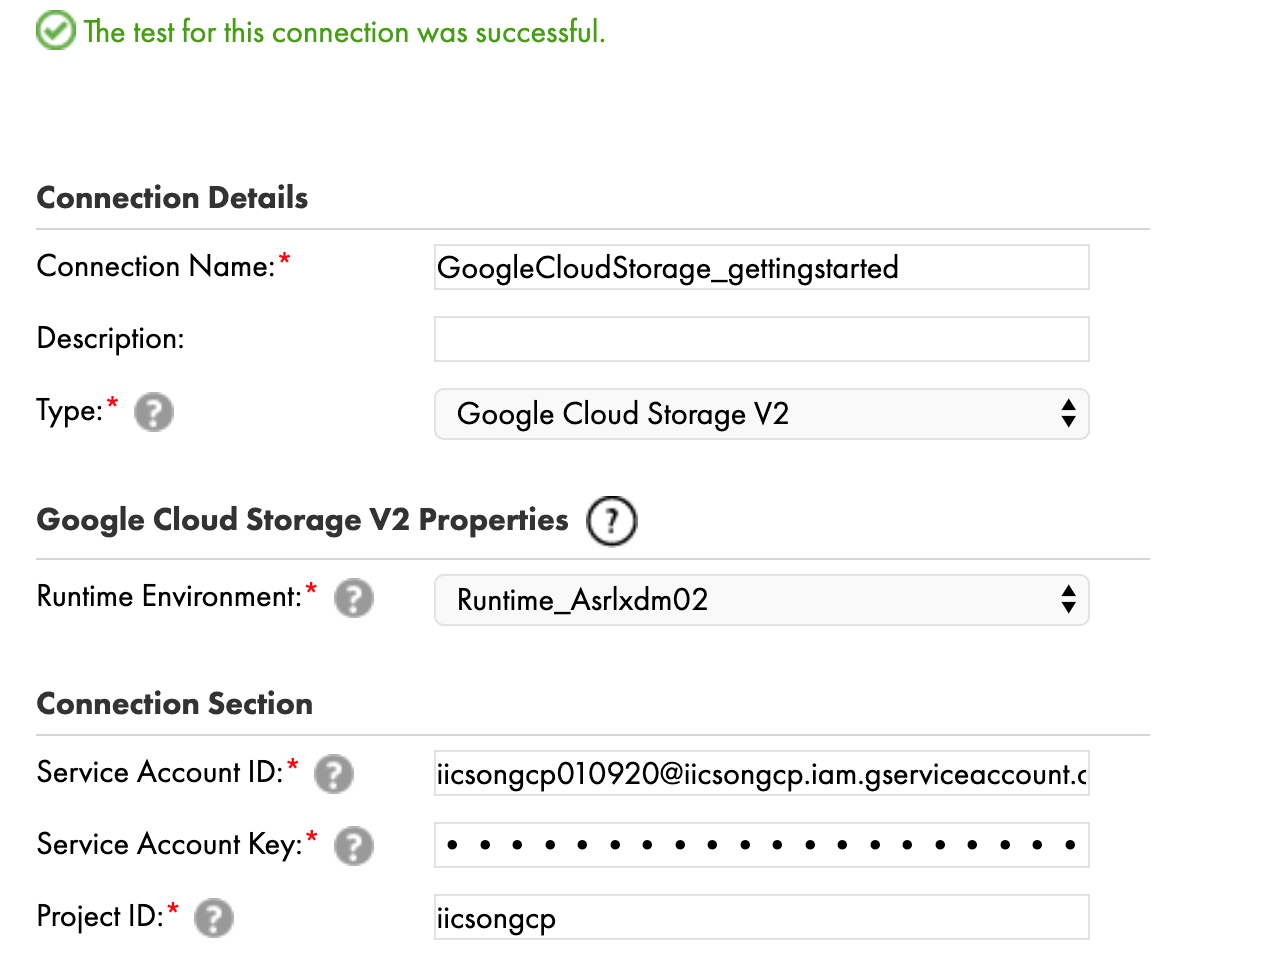 When you successfully create a Google Cloud Storage V2 connection, the message, "The test for this connection was successful" appears above the connection details. 
				  